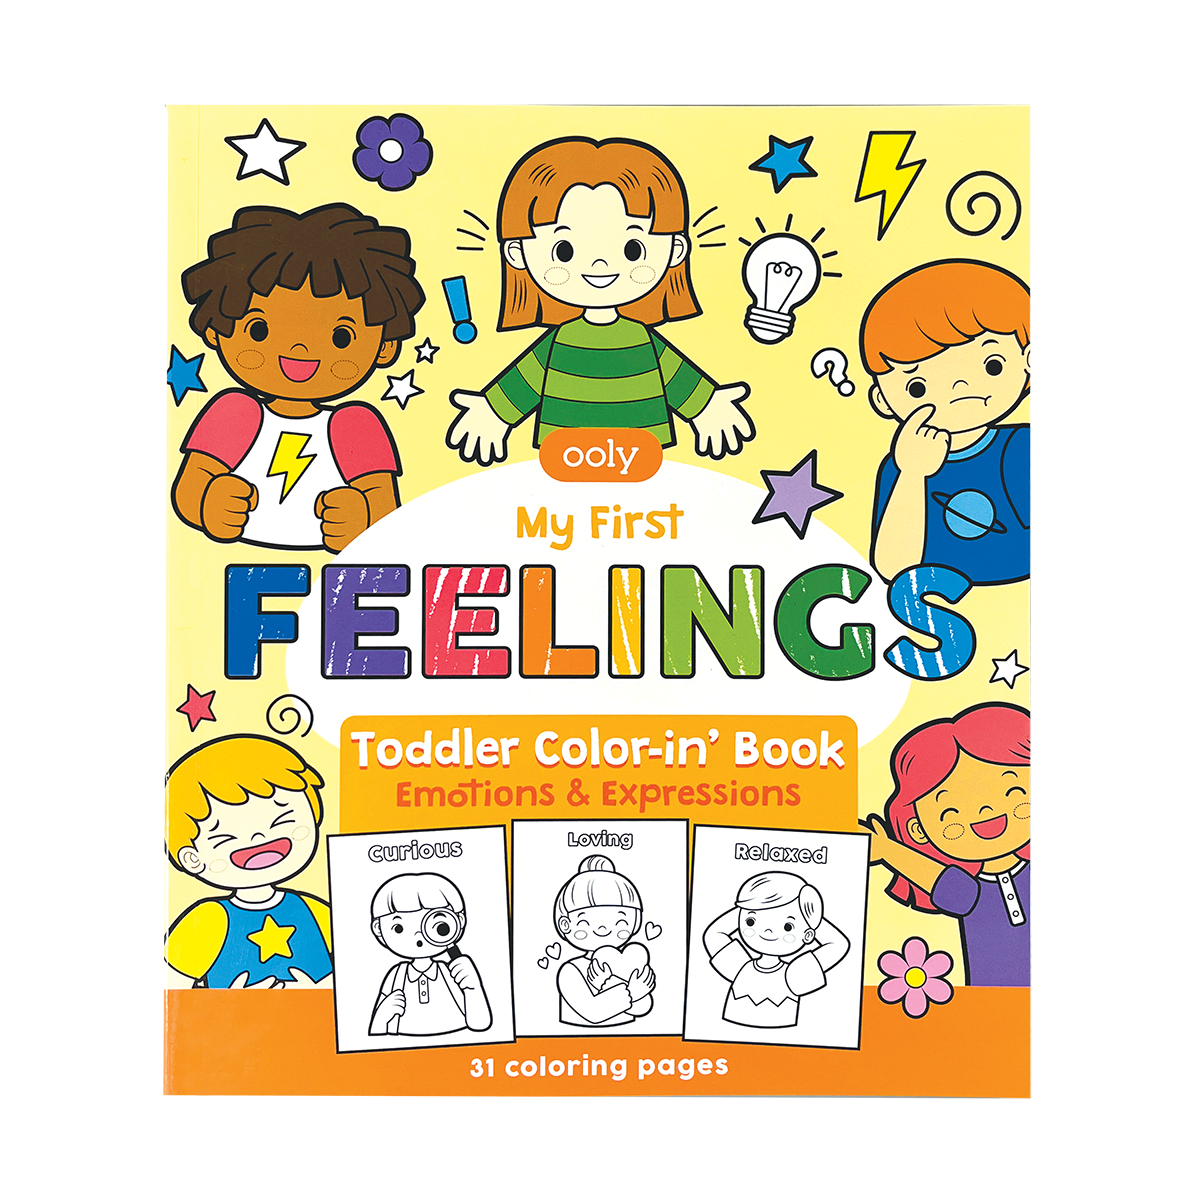 My first feelings toddler color